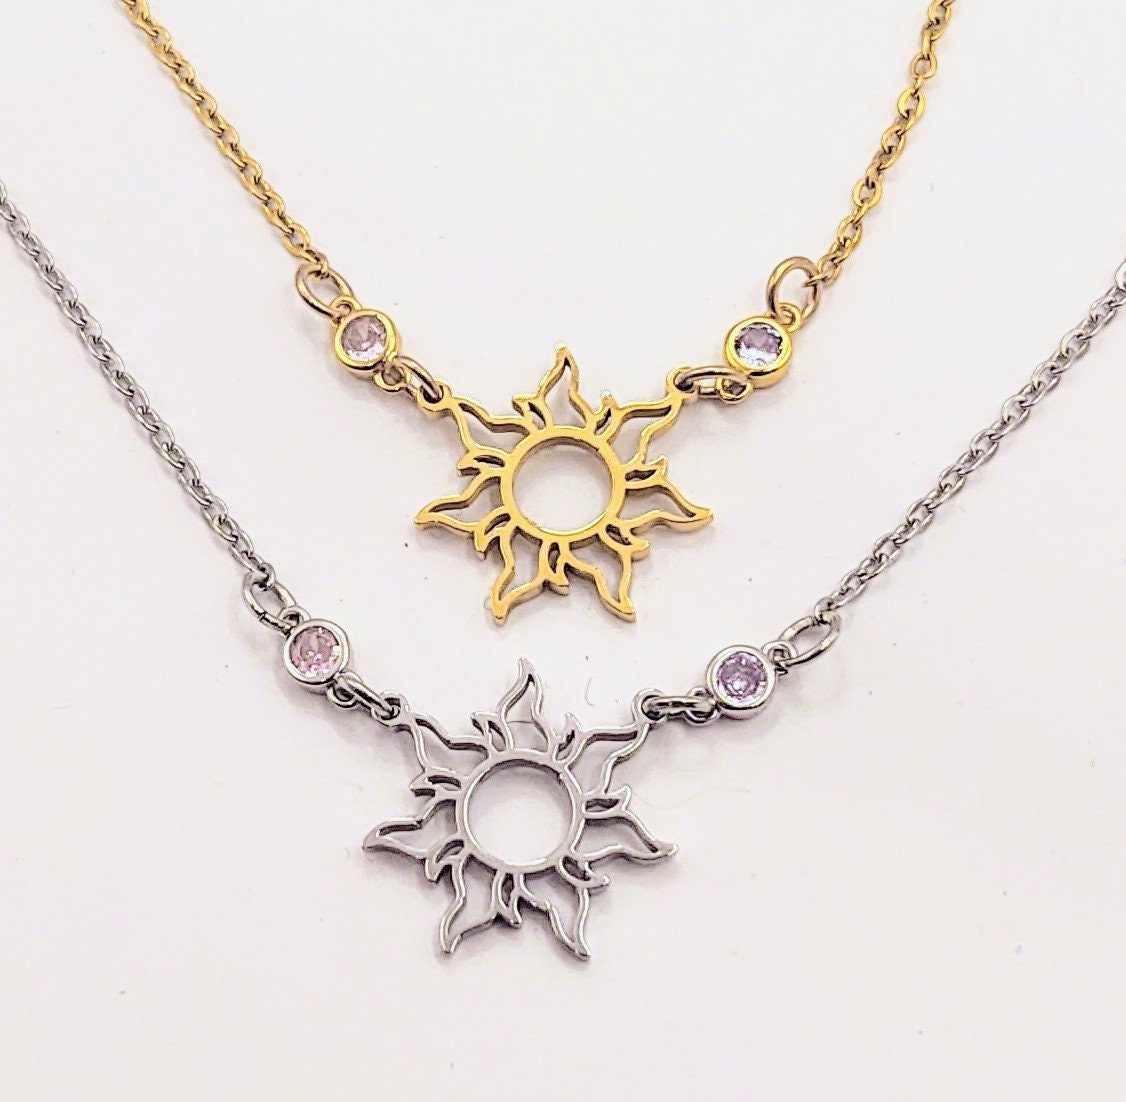 Tangled Sun Necklace with Opal Dainty Celestial Sunburst Jewelry for Women  Sunshine Sun Charm Available in Silverstone/goldtone